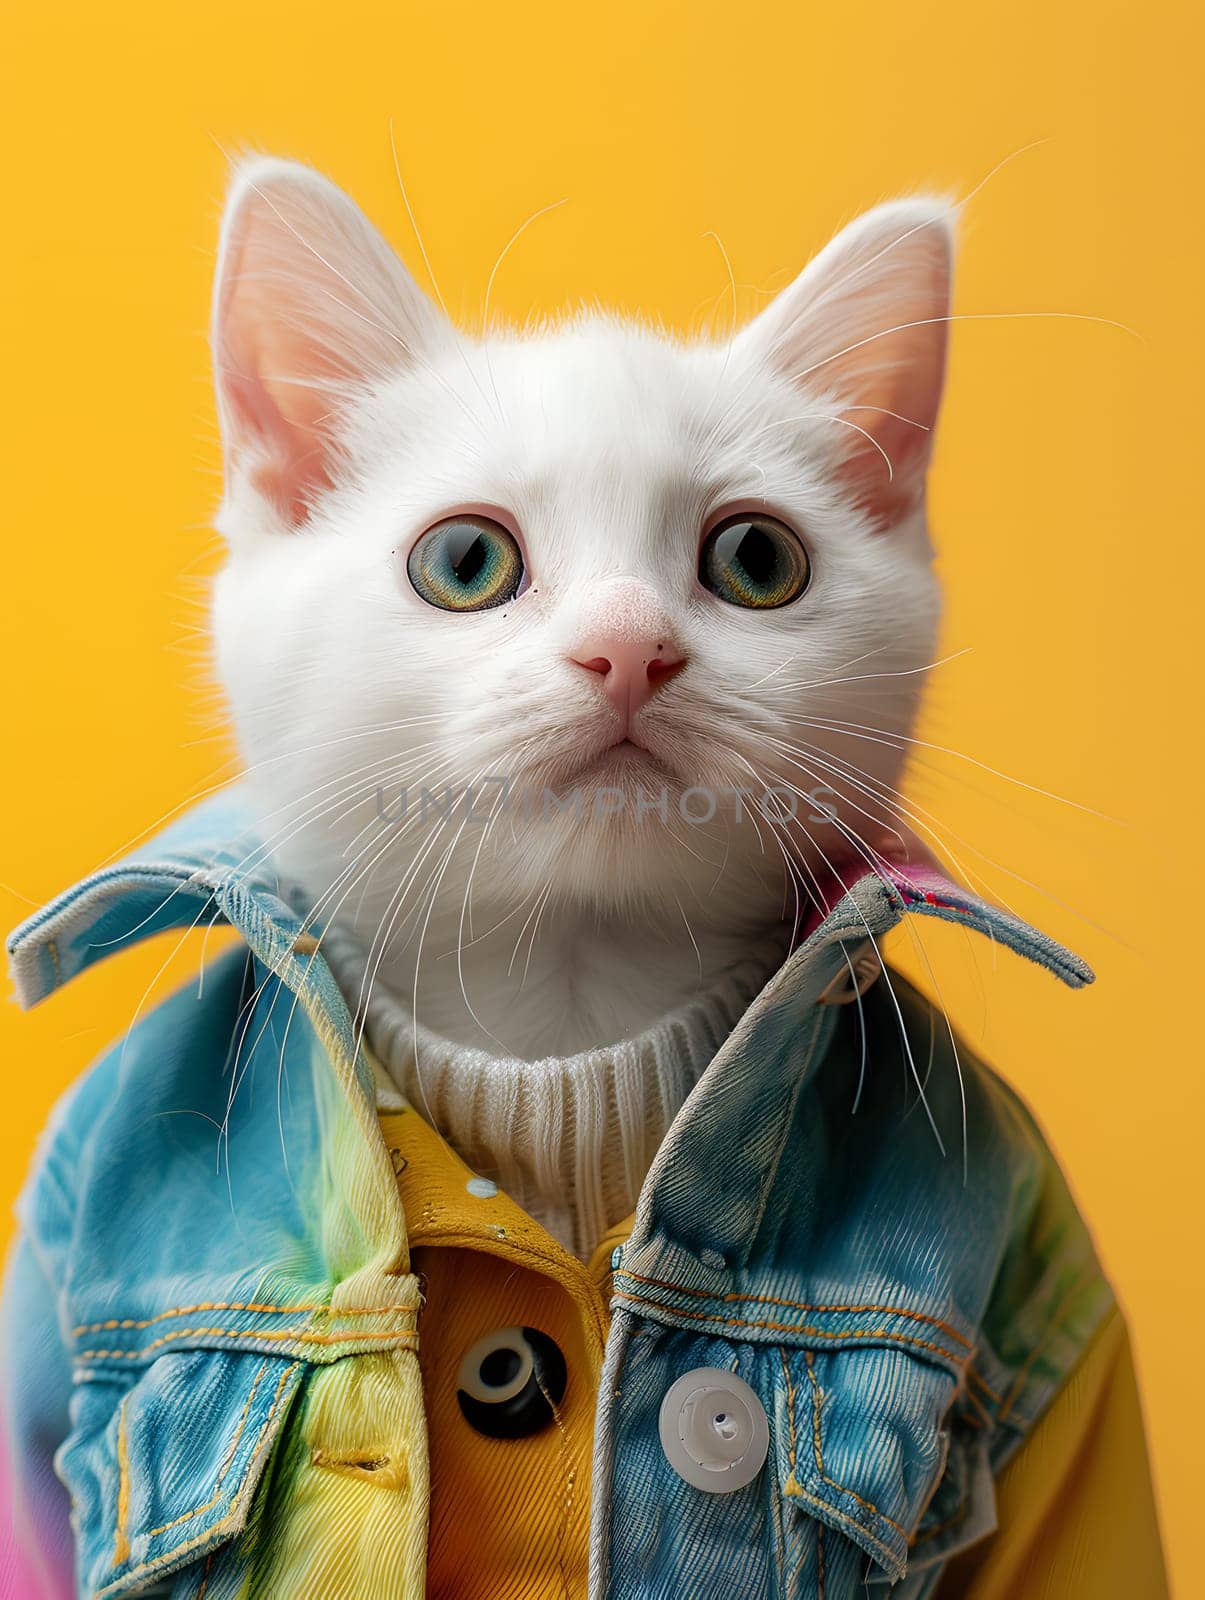 White Felidae wearing denim jacket and sweater, creative arts collar accessory by Nadtochiy